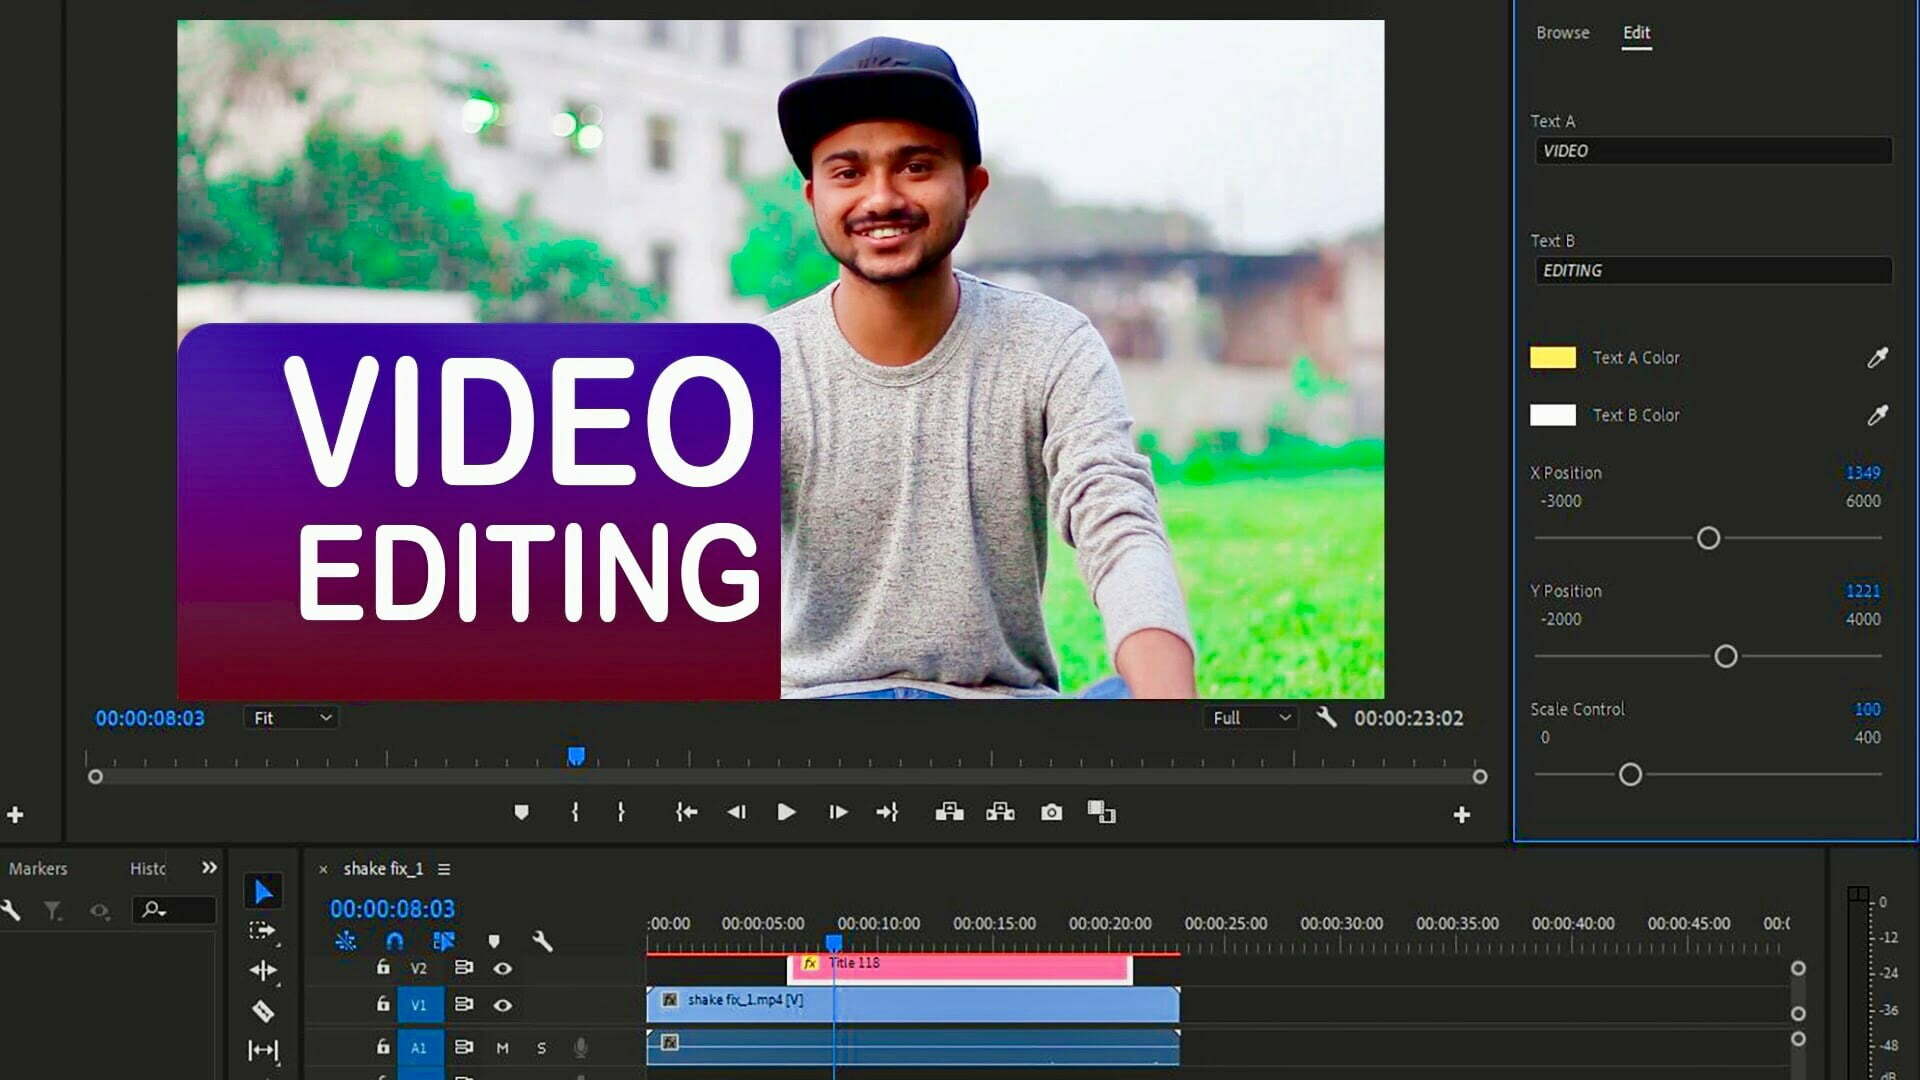 E-commerce  Product  Videography  Editing  Service  OnLine